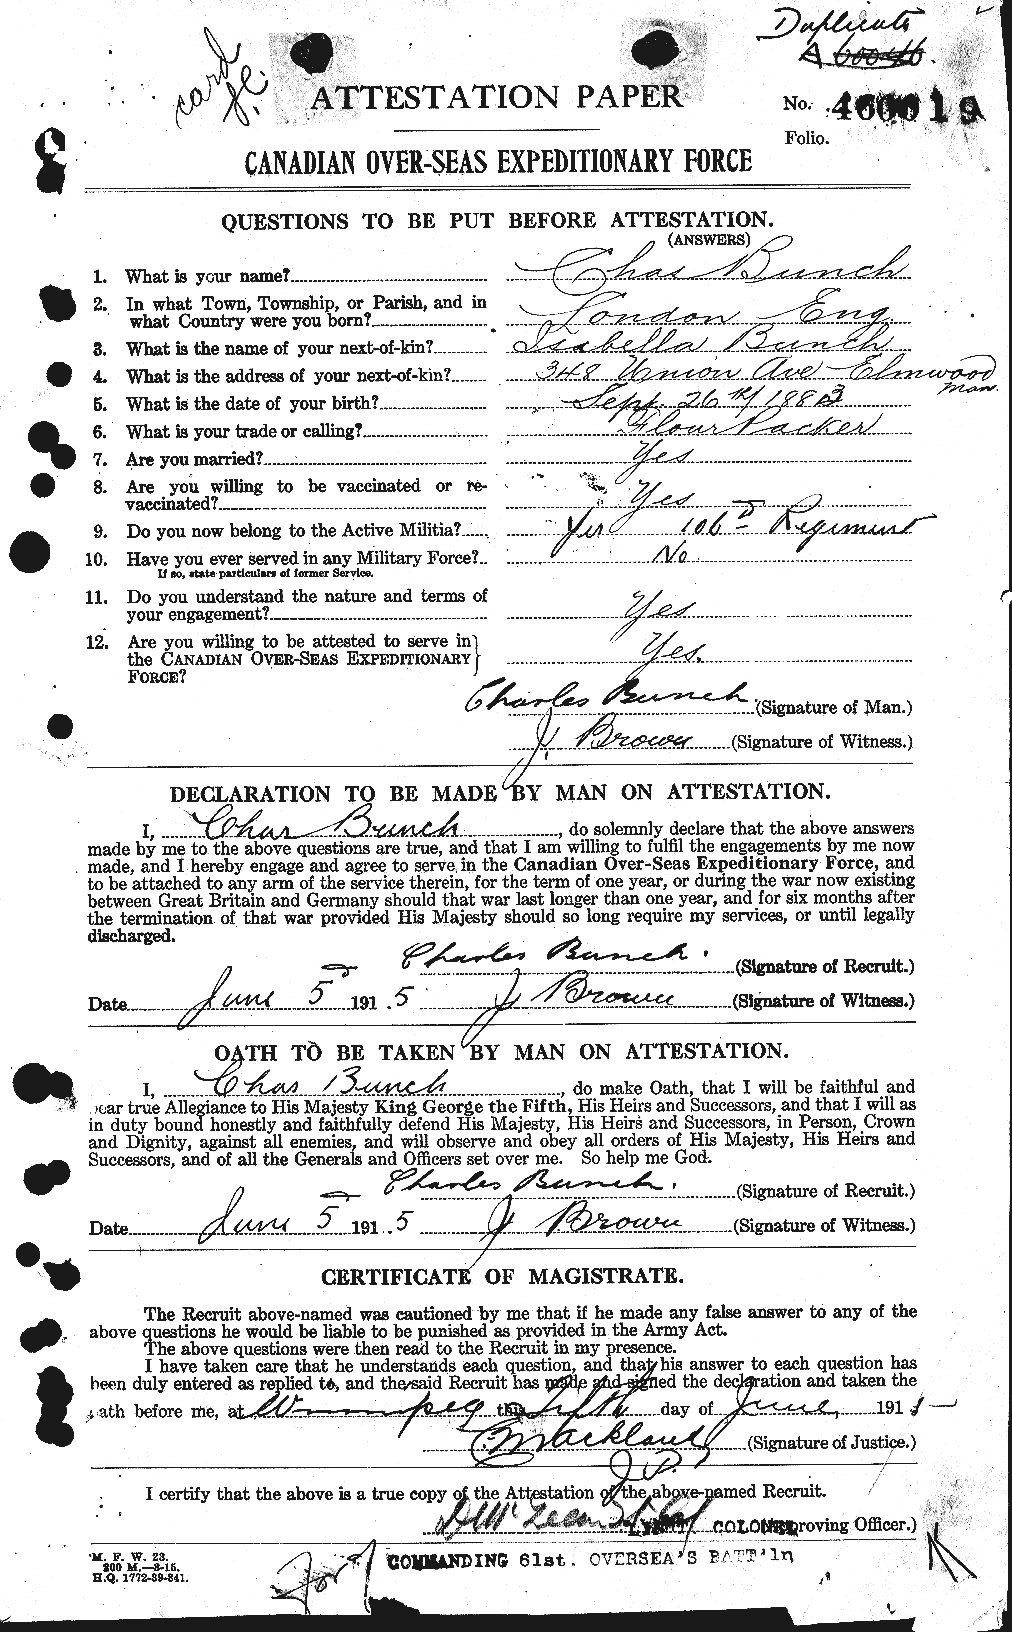 Personnel Records of the First World War - CEF 270349a